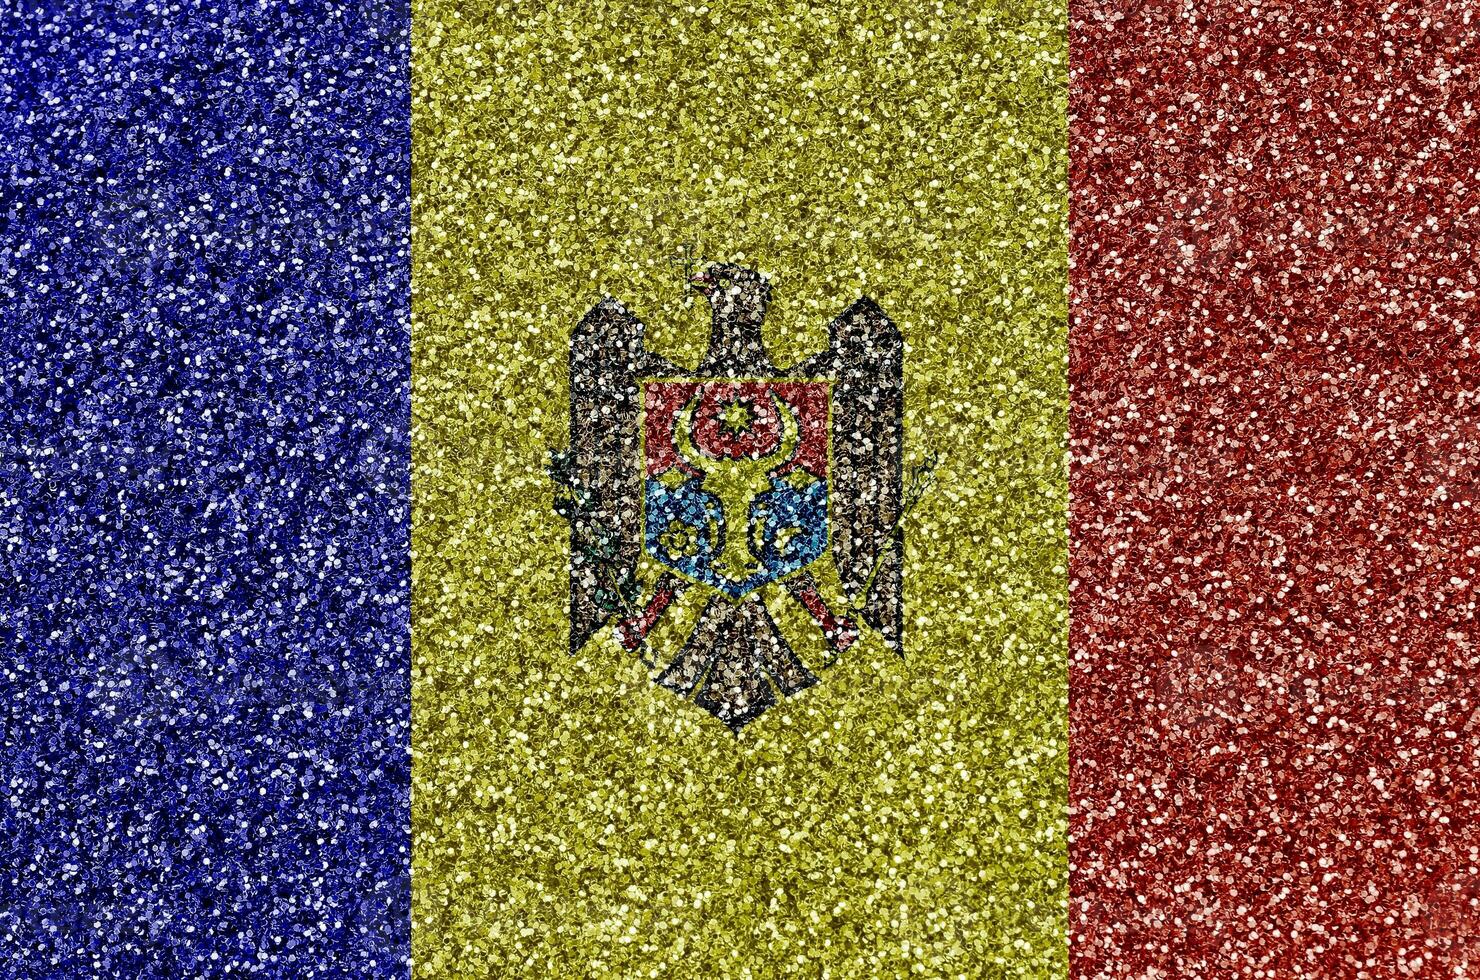 Moldova flag depicted on many small shiny sequins. Colorful festival background for party photo